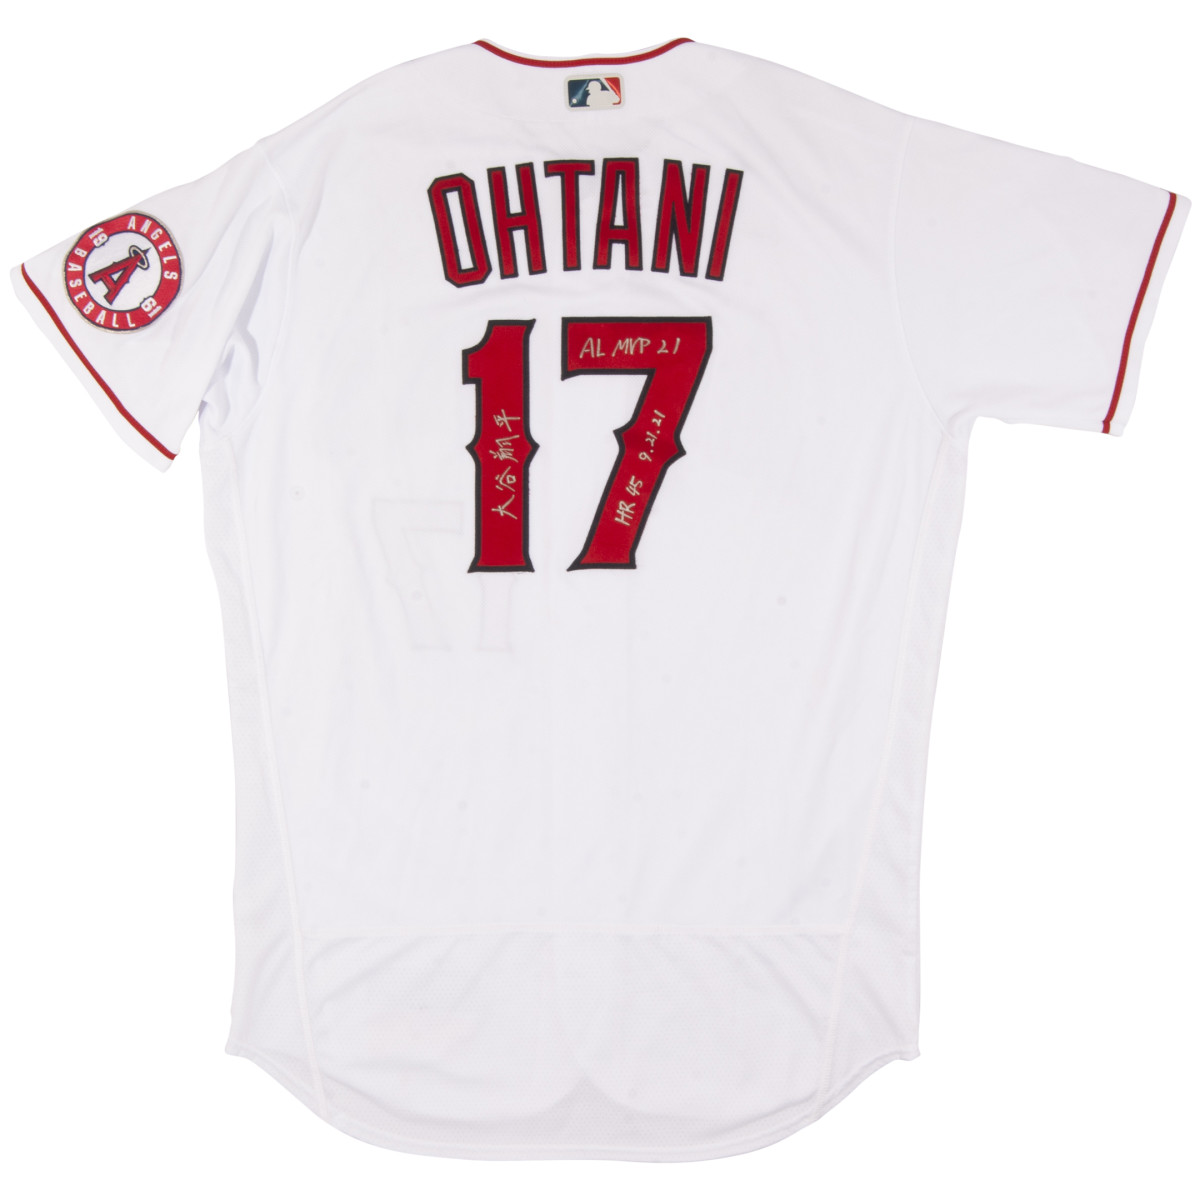 Shohei Ohtani signed and game-worn jersey from his 2021 MVP season.